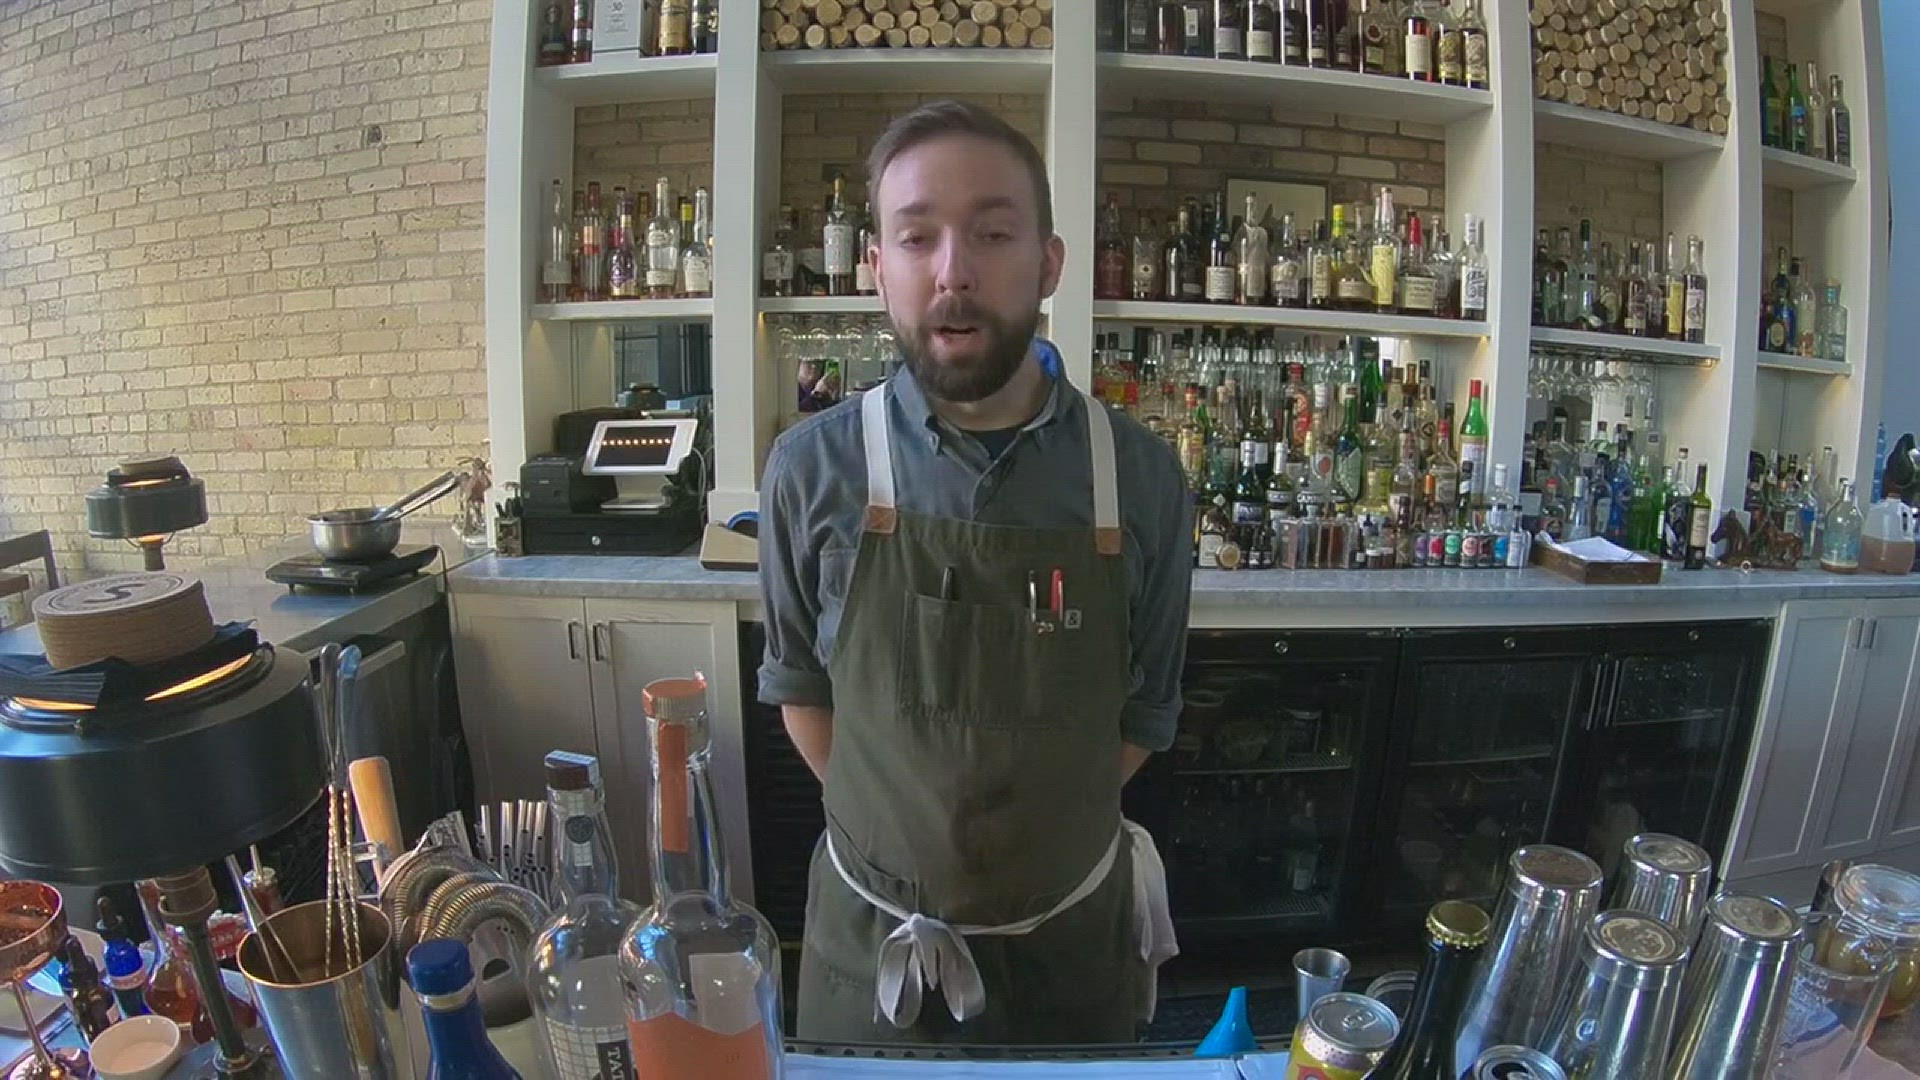 Bar Director Rob Jones from Spoon and Stable and Bellecour offers one of his Super Bowl cocktail recommendations, Mulled cider.